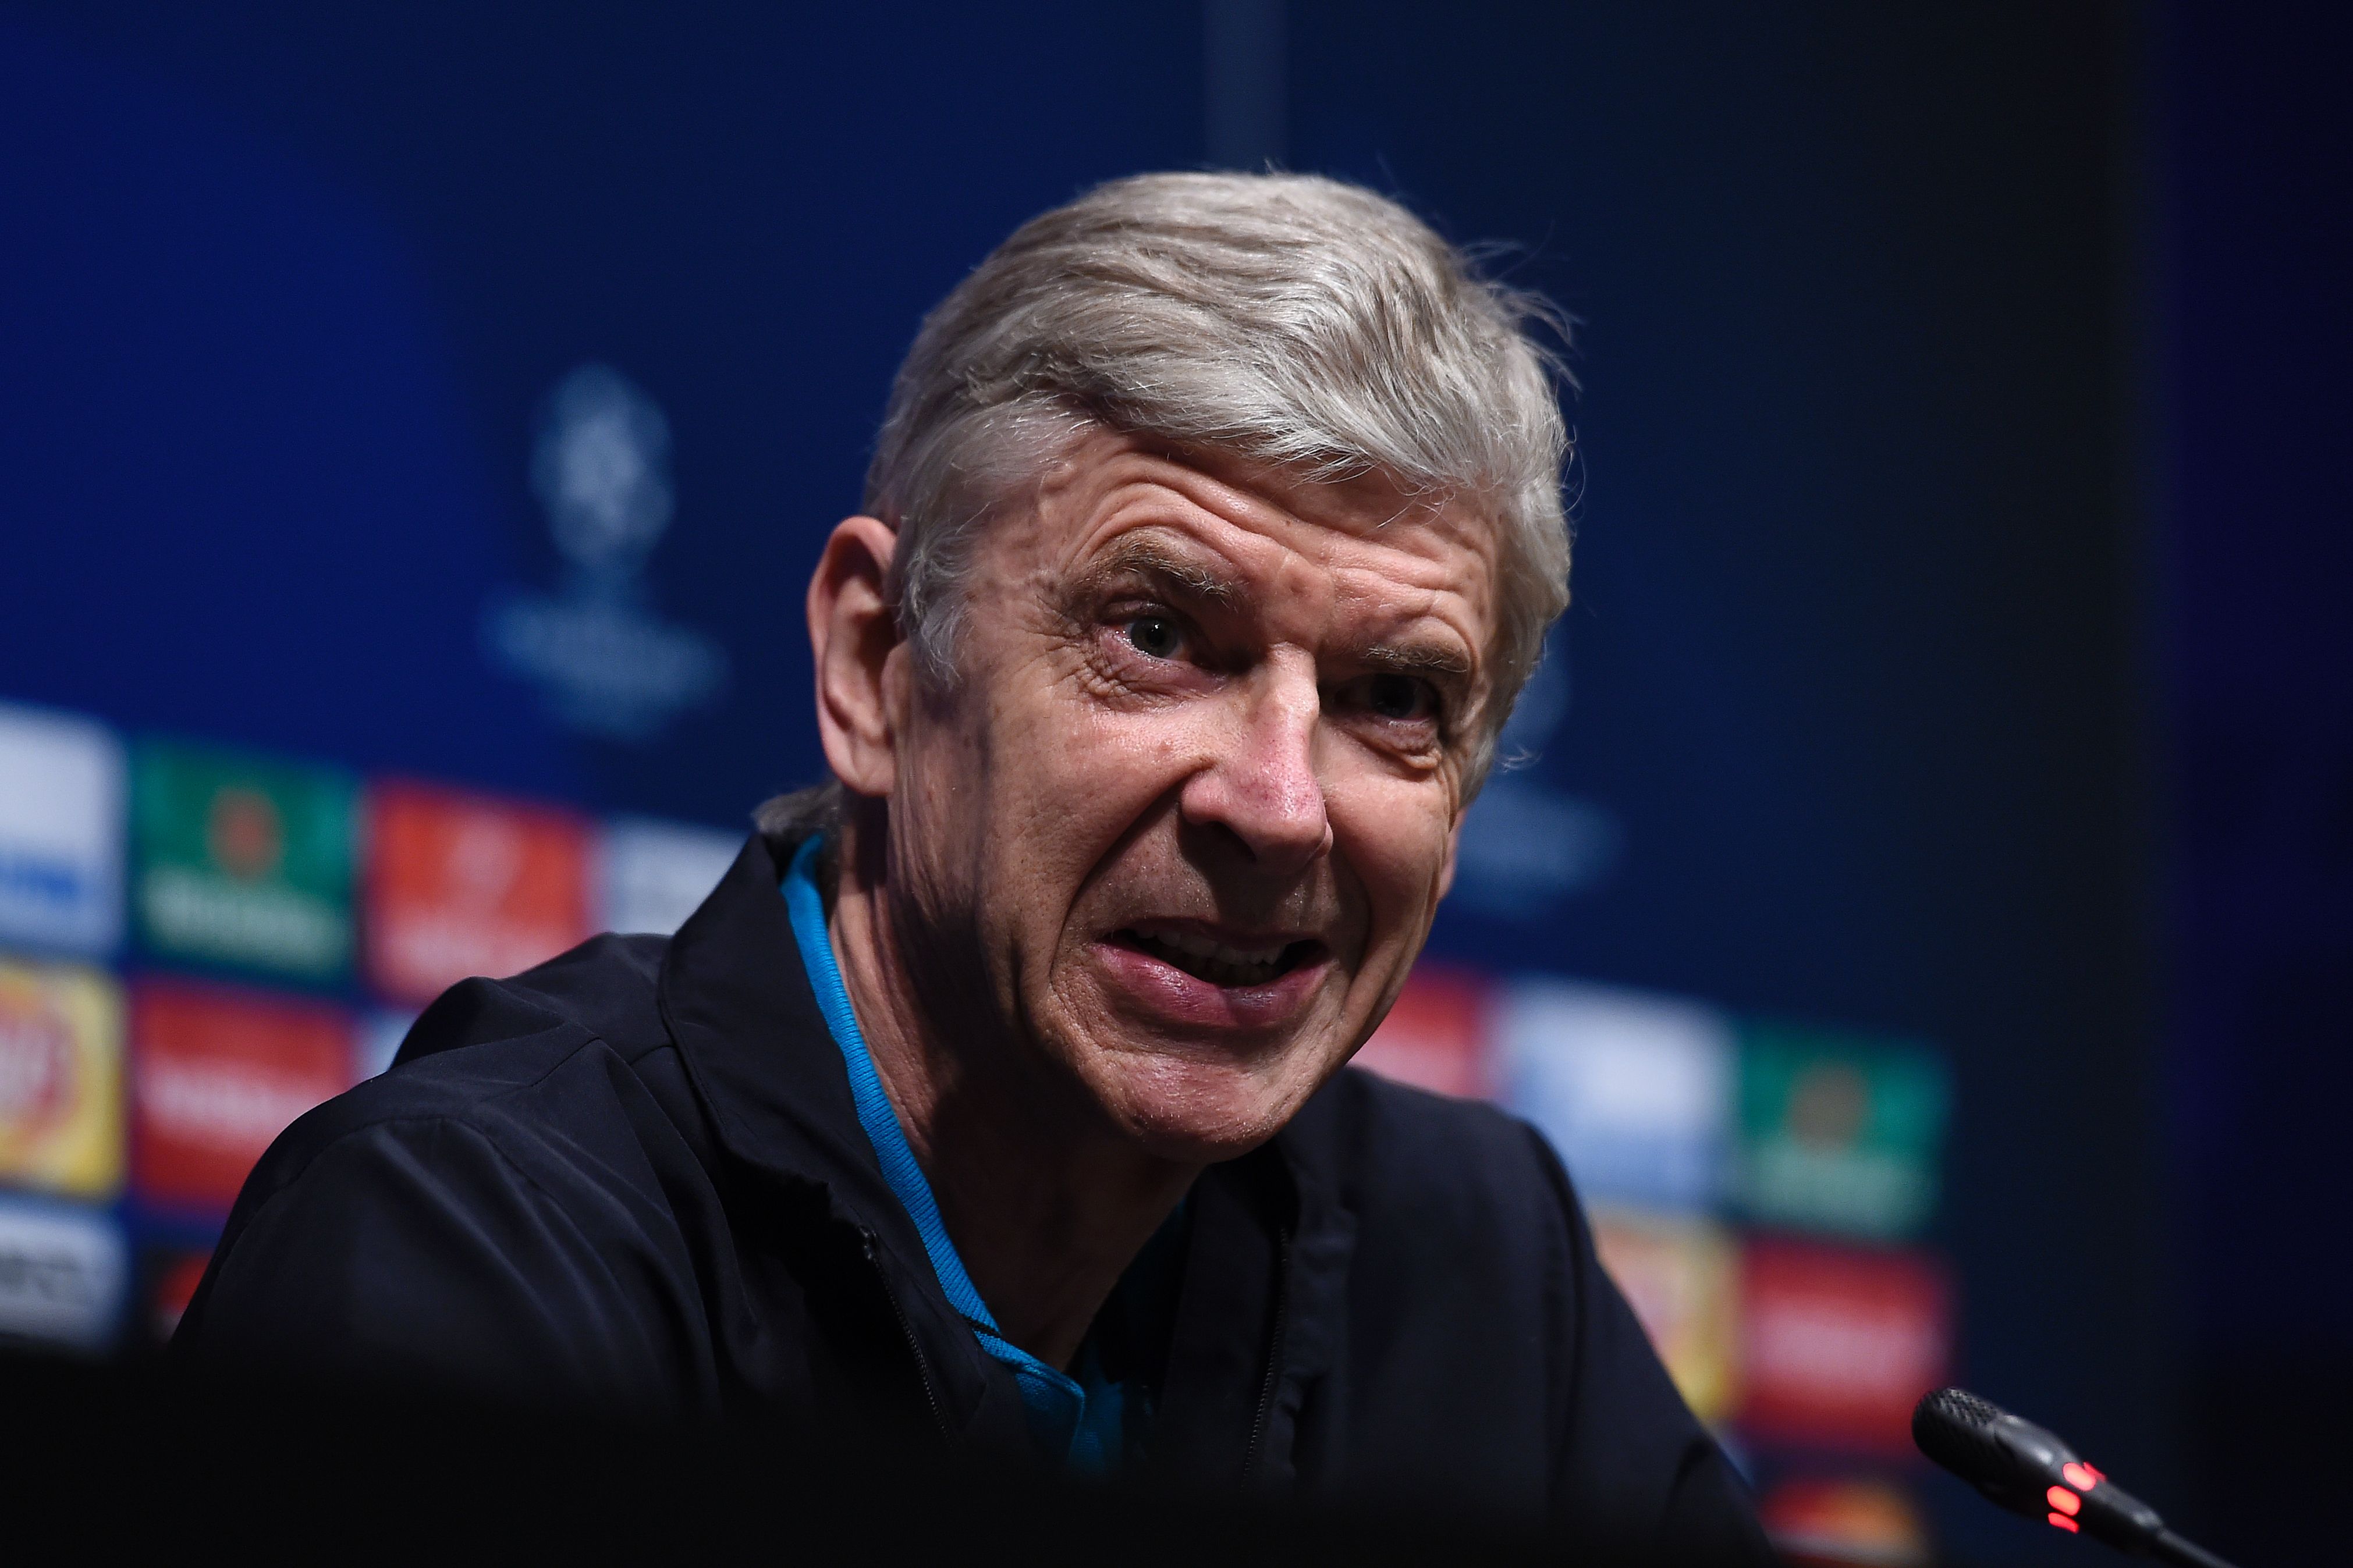 Arsenal's French coach Arsene Wenger gives a press conference at the the Camp Nou stadium in Barcelona on March 15, 2016, on the eve of the Round 16 of the UEFA Champions League  football match between FC Barcelona and Arsenal FC.  / AFP / JOSEP LAGO        (Photo credit should read JOSEP LAGO/AFP/Getty Images)